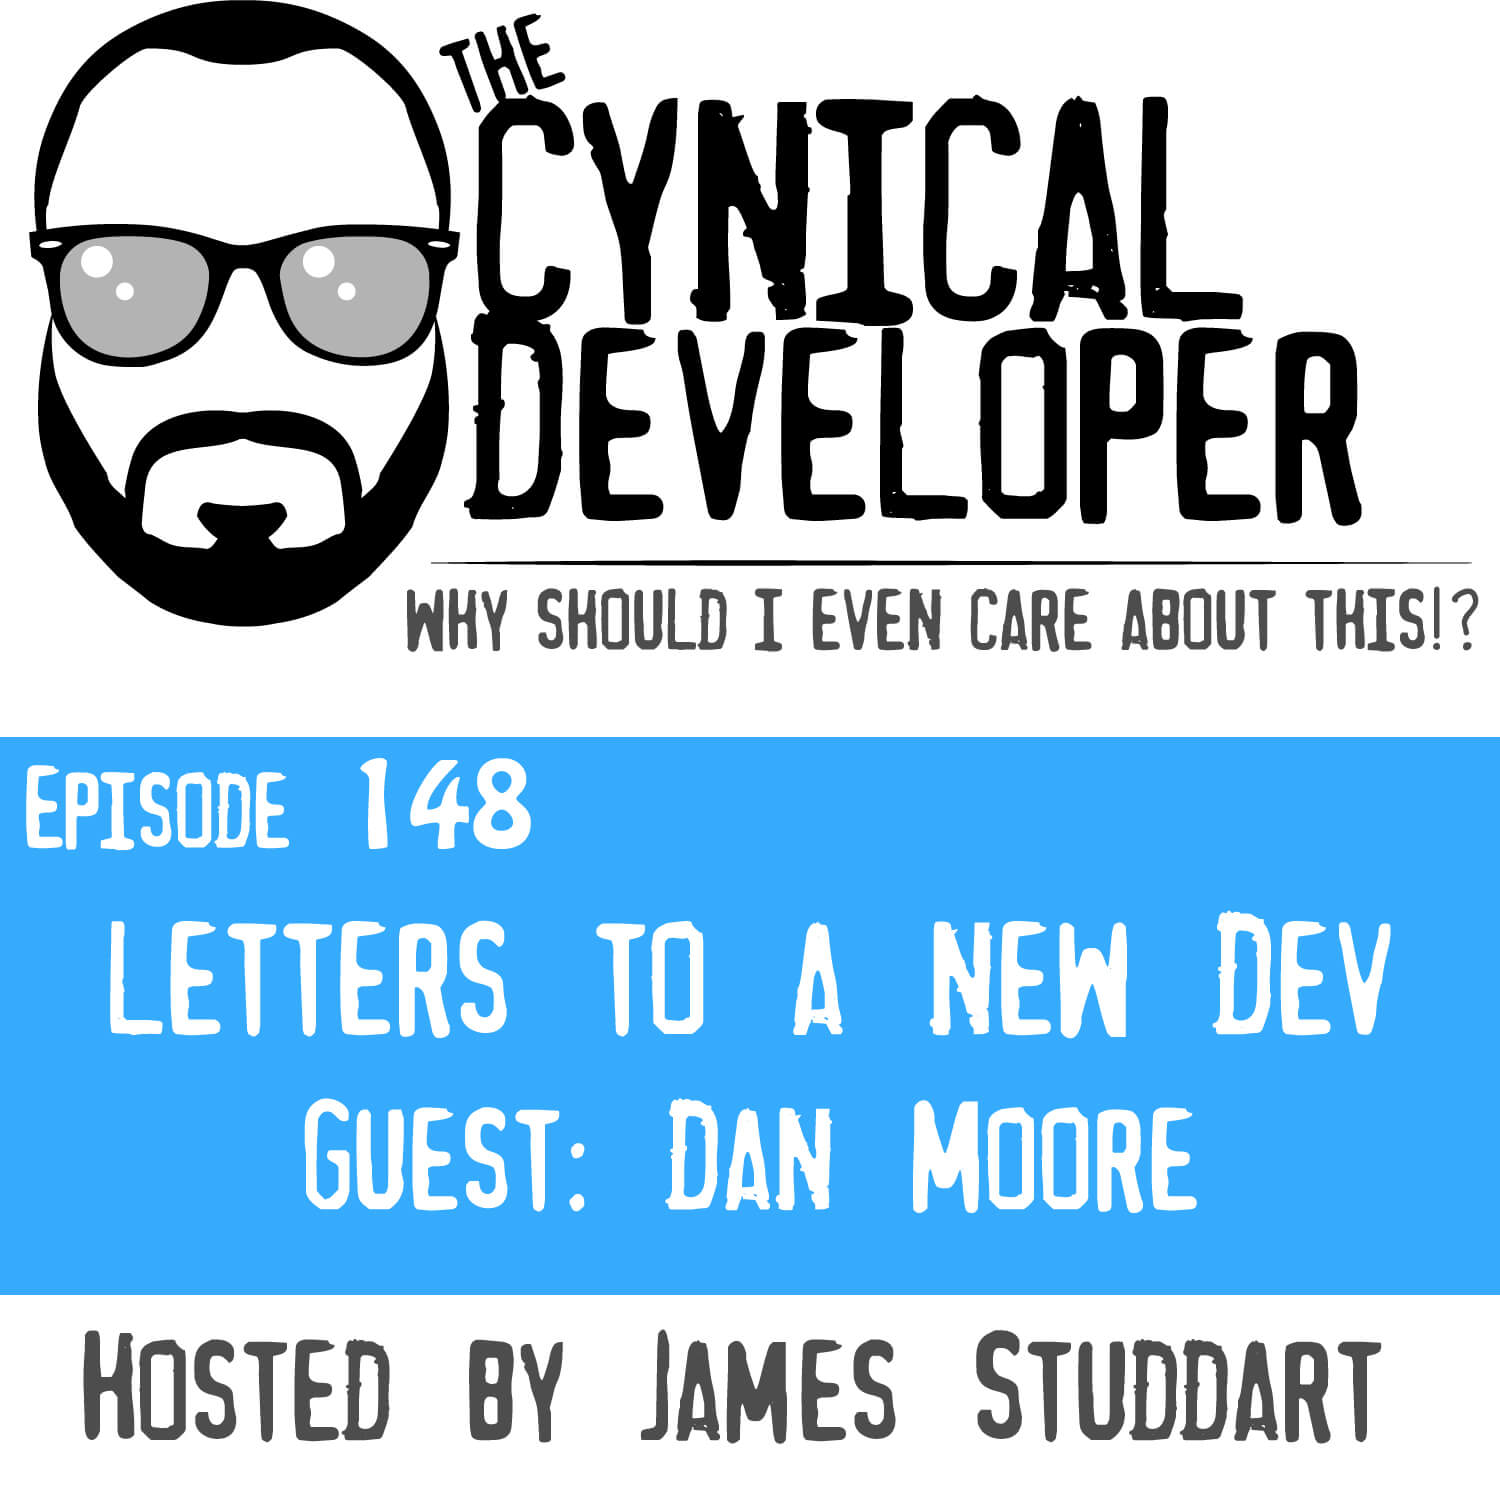 Episode 148 - Letters to a new dev